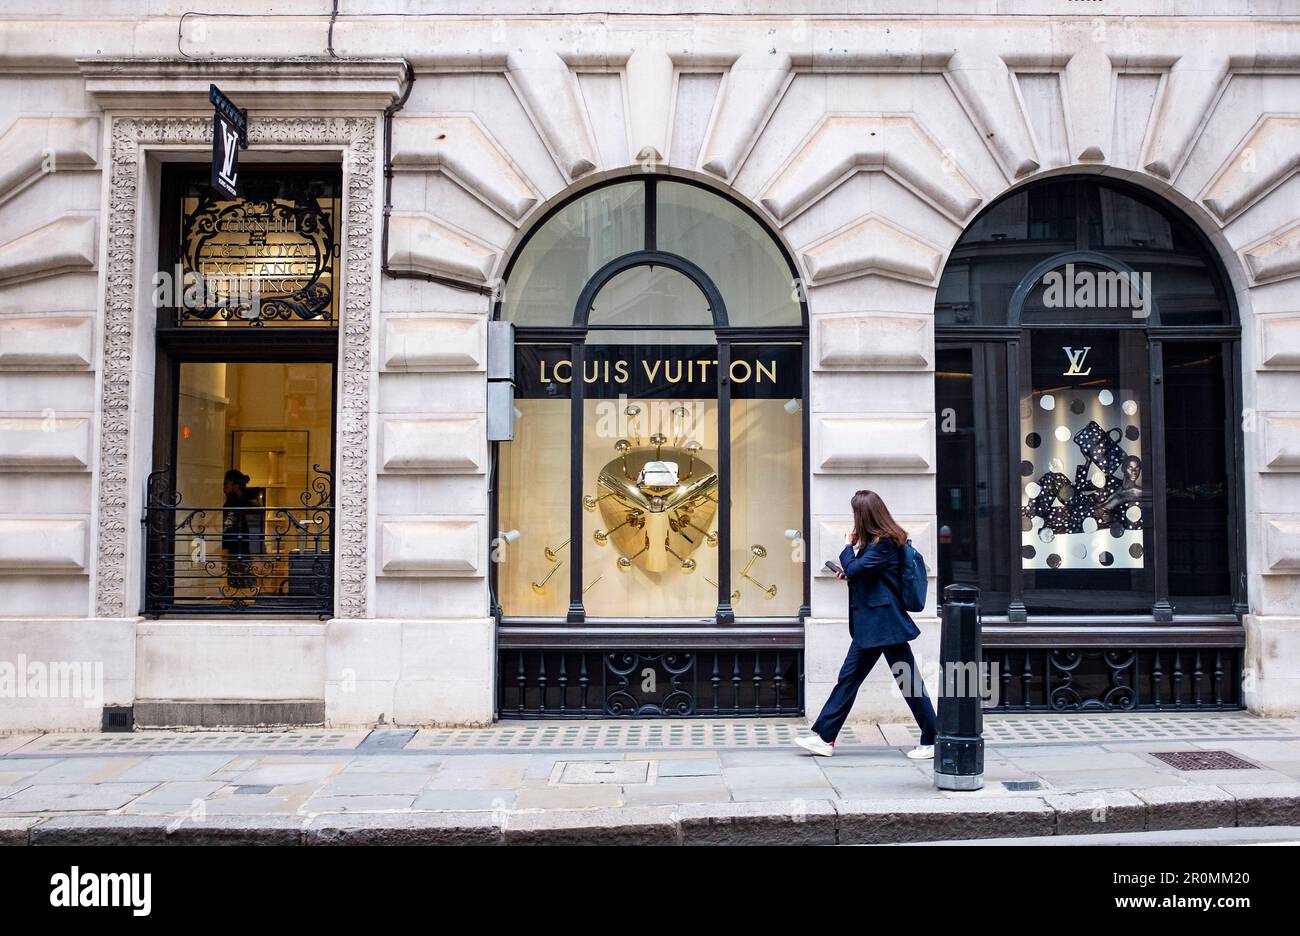 London Views  - The Louis Vuitton shop at The Royal Exchange in the city financial district Stock Photo